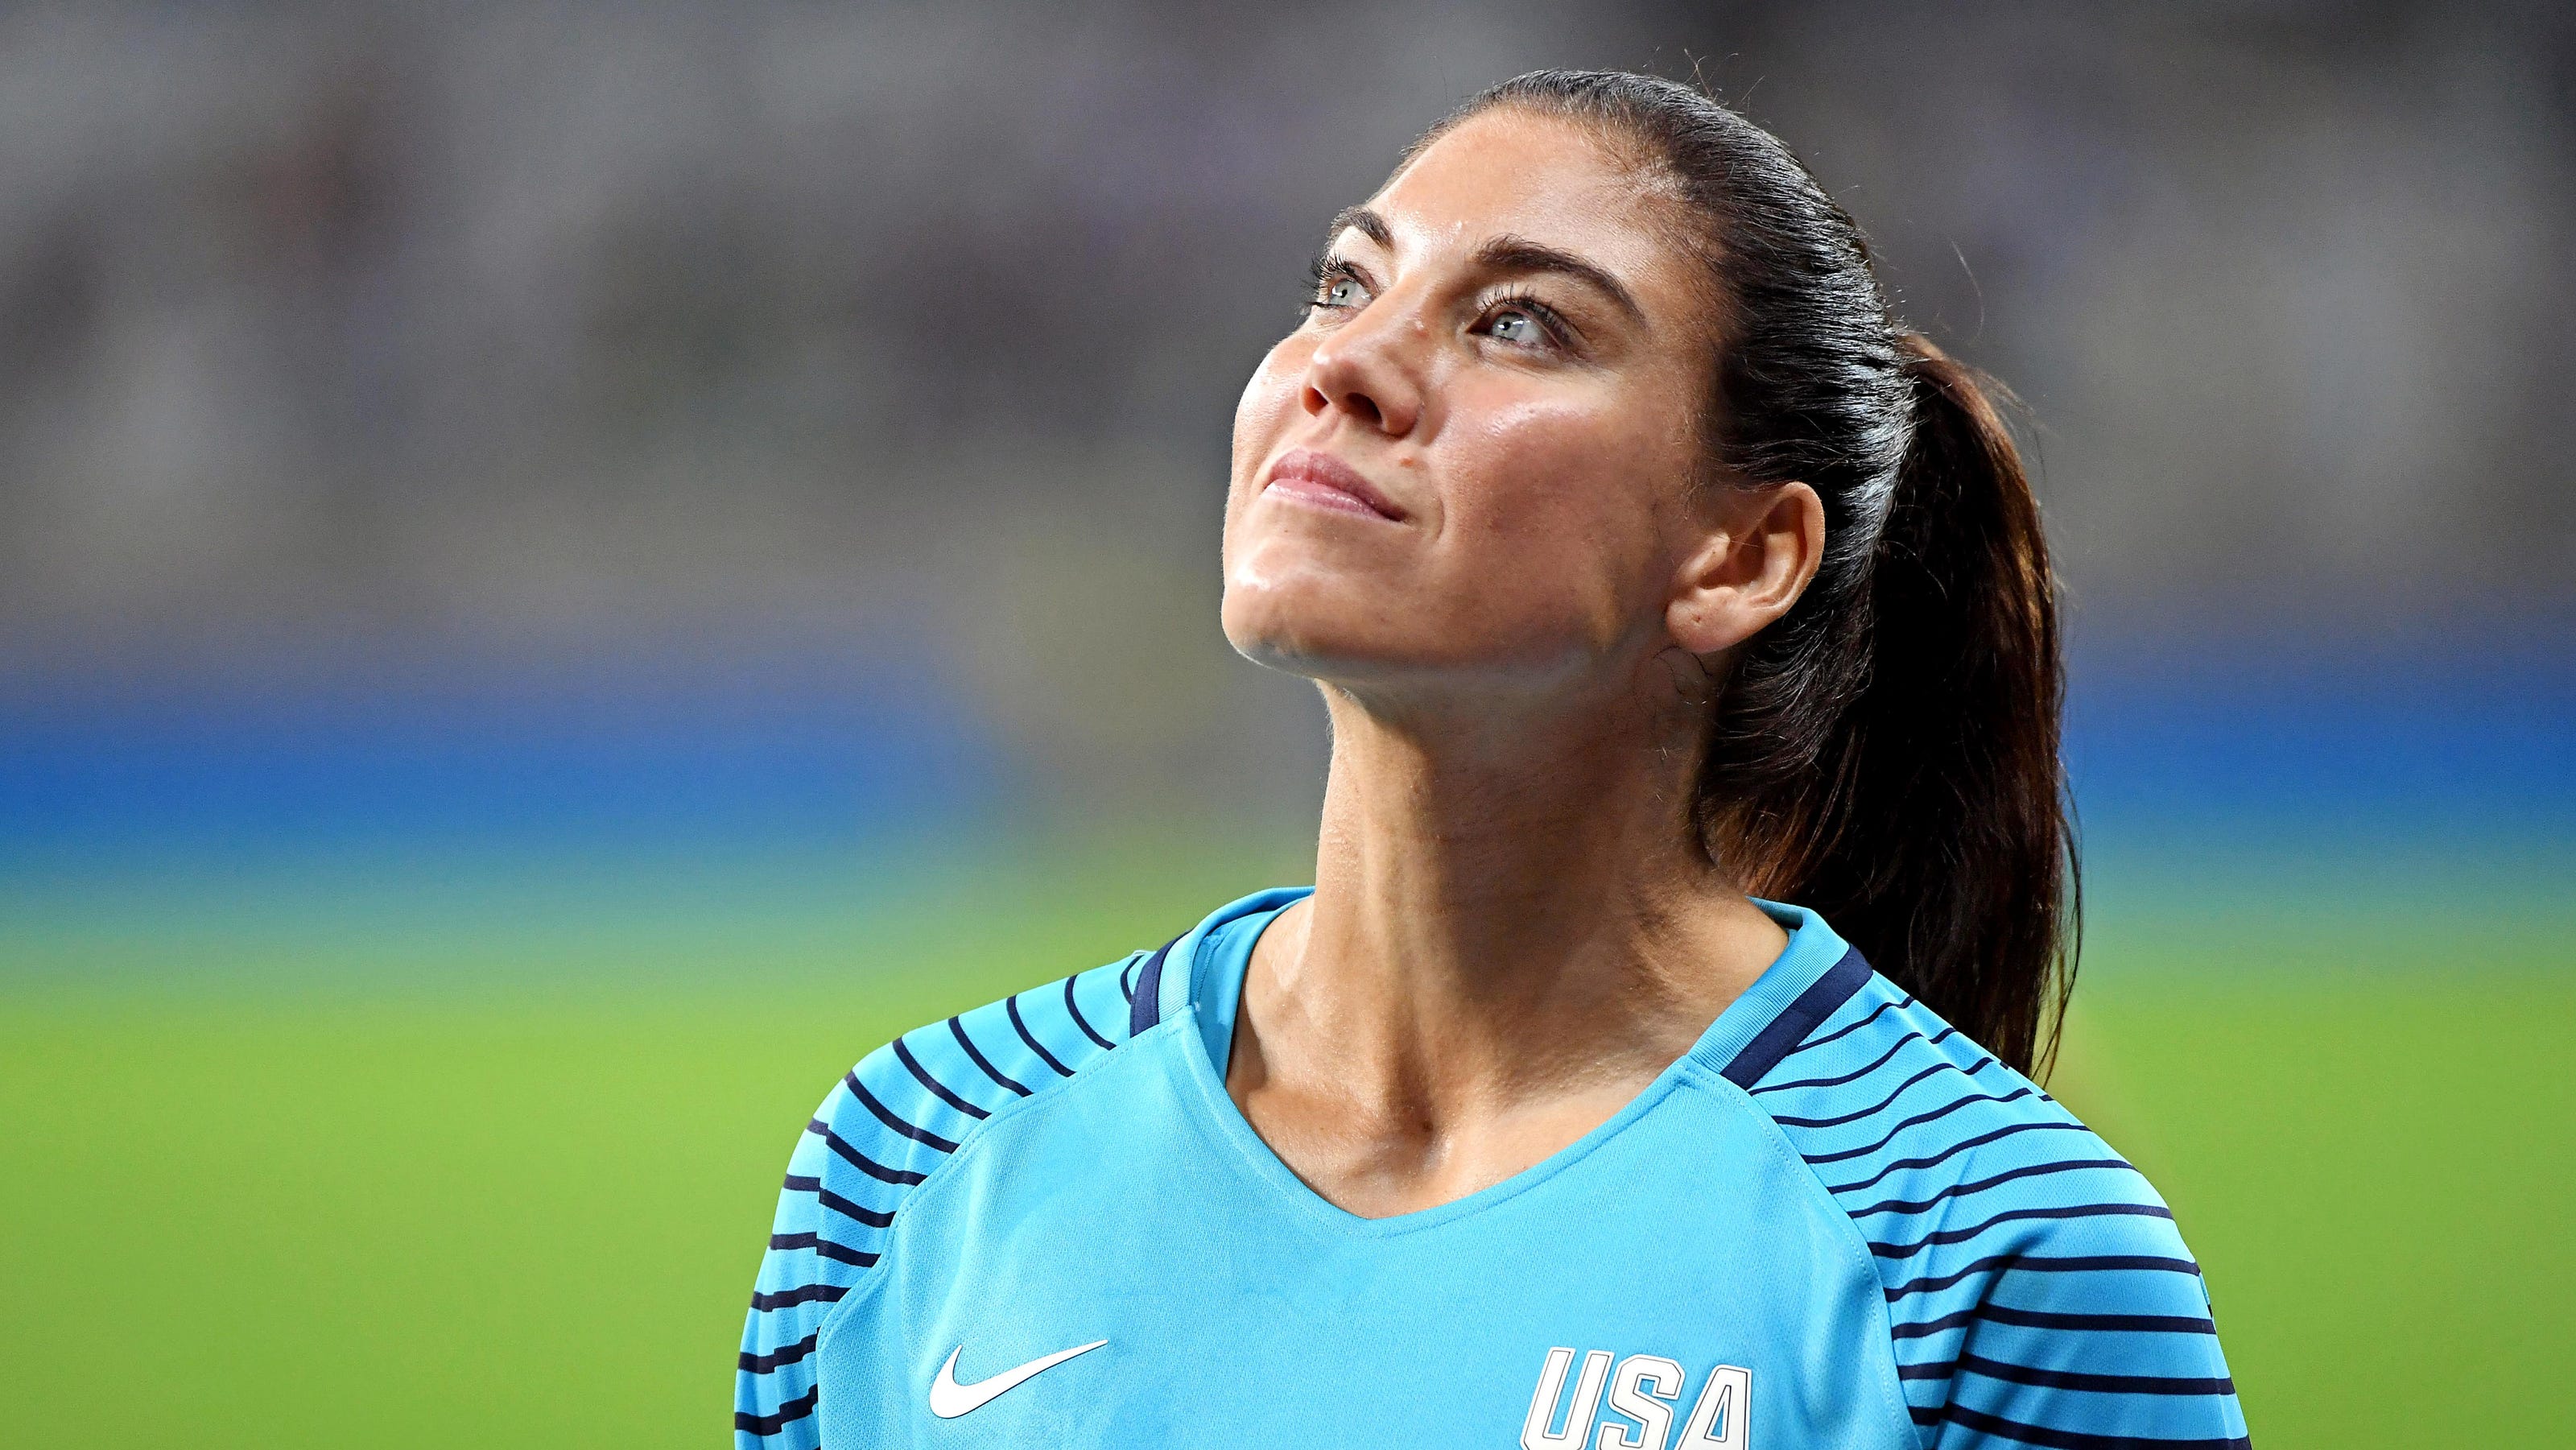 Hope Solo Dwi Arrest Shown In New Body Camera Video From March 2022